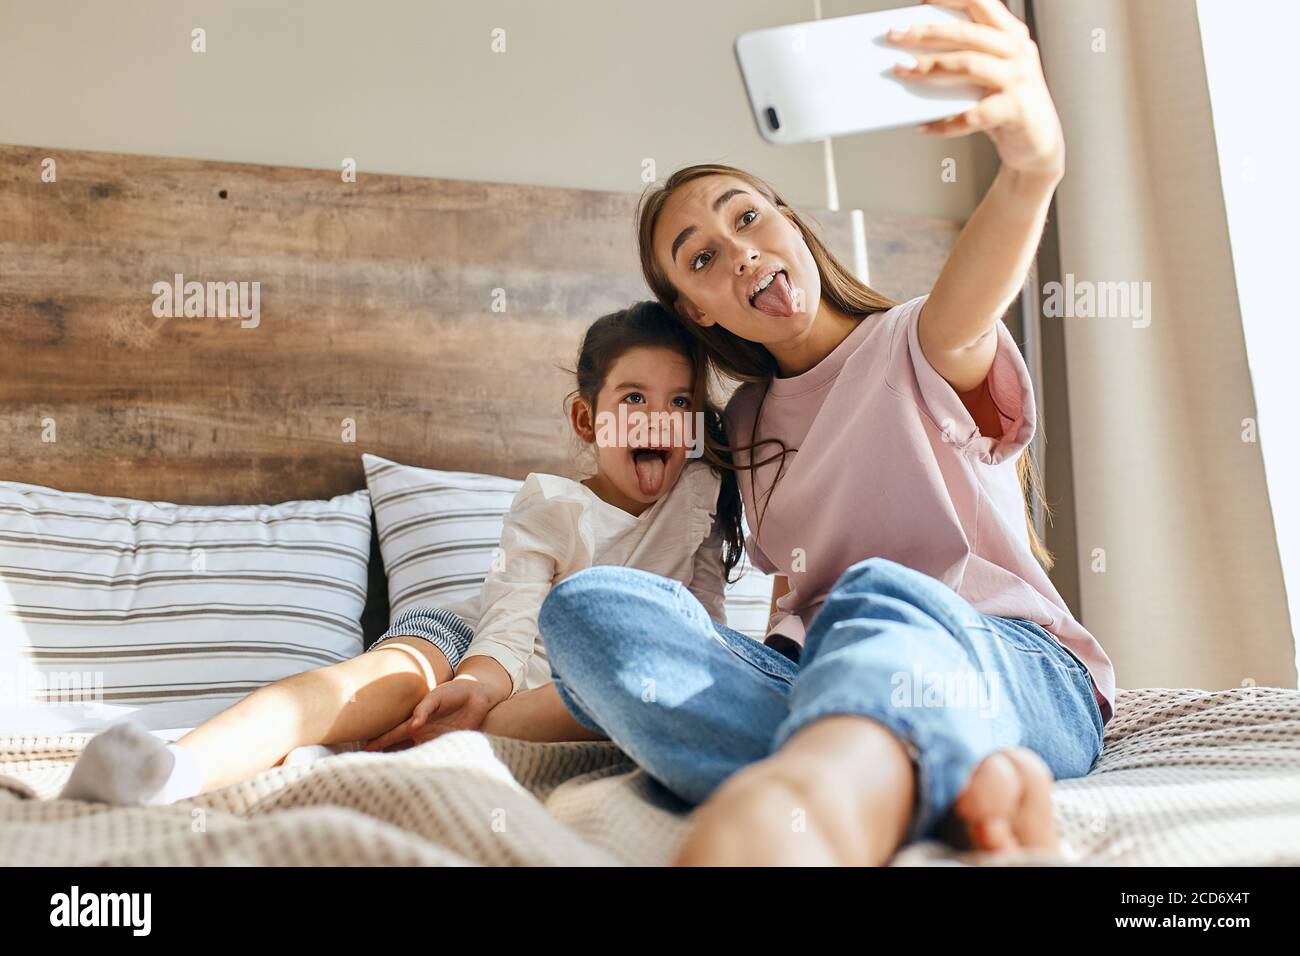 Two beautiful girls having fun in bedroom, attractive woman takes photo using cell phone, showing tongue full of joy, background of small pillows, mor Stock Photo